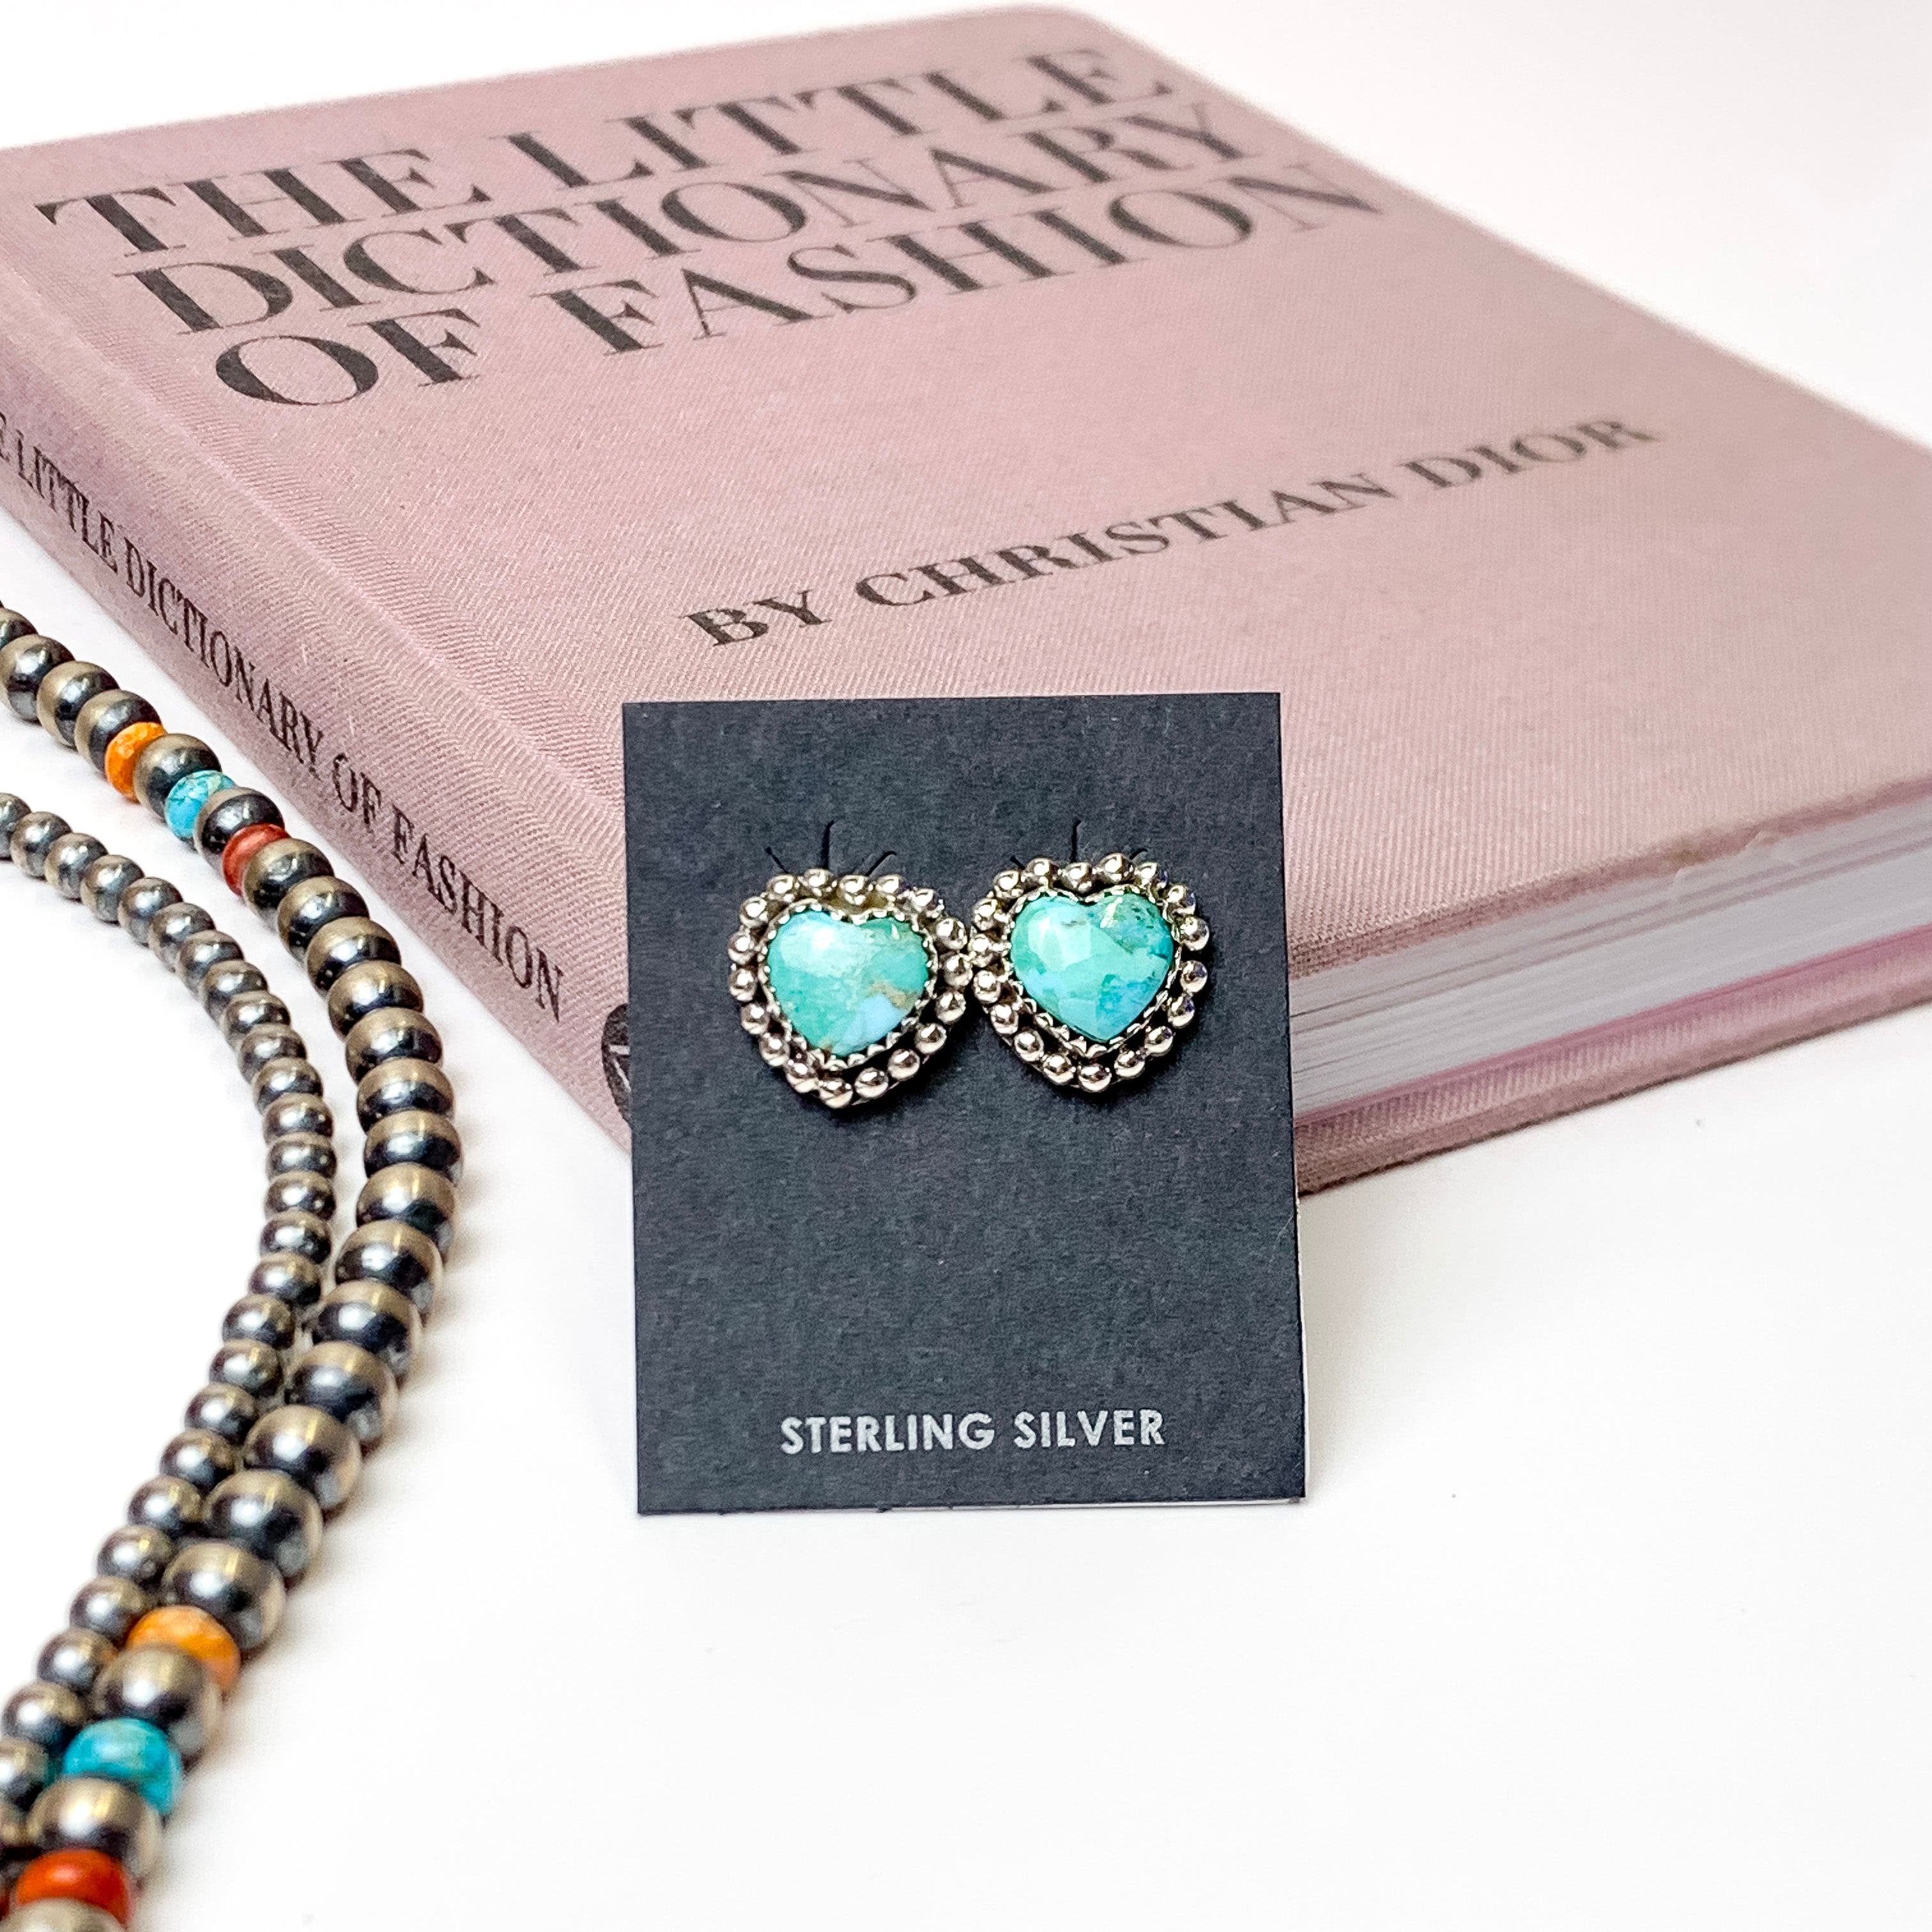 Hada Collection | Handmade Sterling Silver Heart Shaped Stud Earrings with Kingman Turquoise Remix Stones - Giddy Up Glamour Boutique